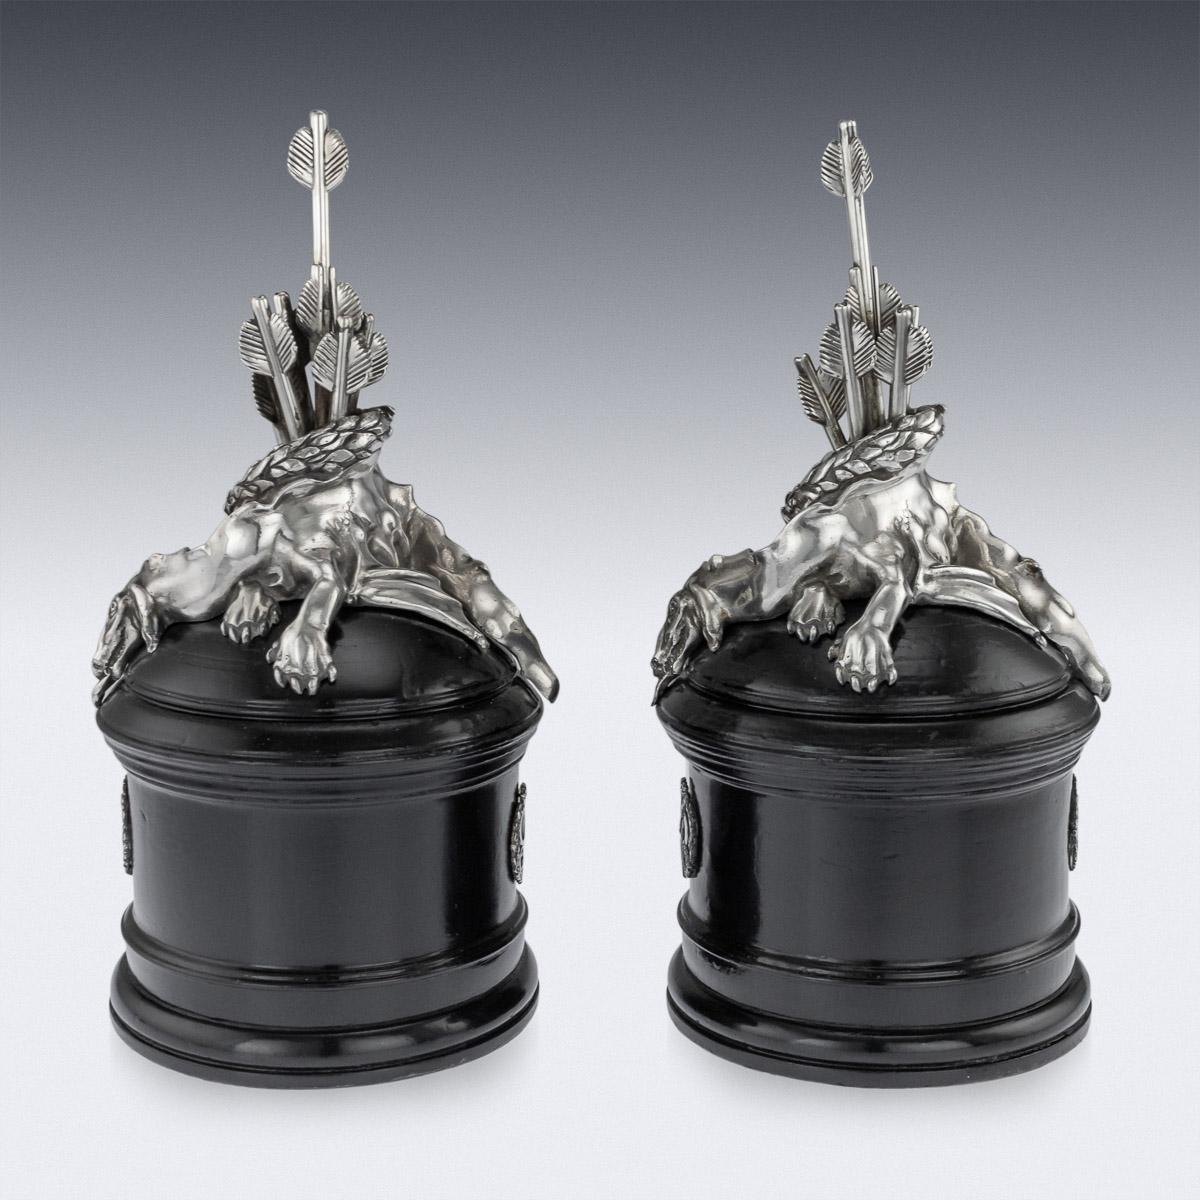 English 20th Century British Solid Silver 'Rifle Regiment' Centrepieces, c.1961 For Sale